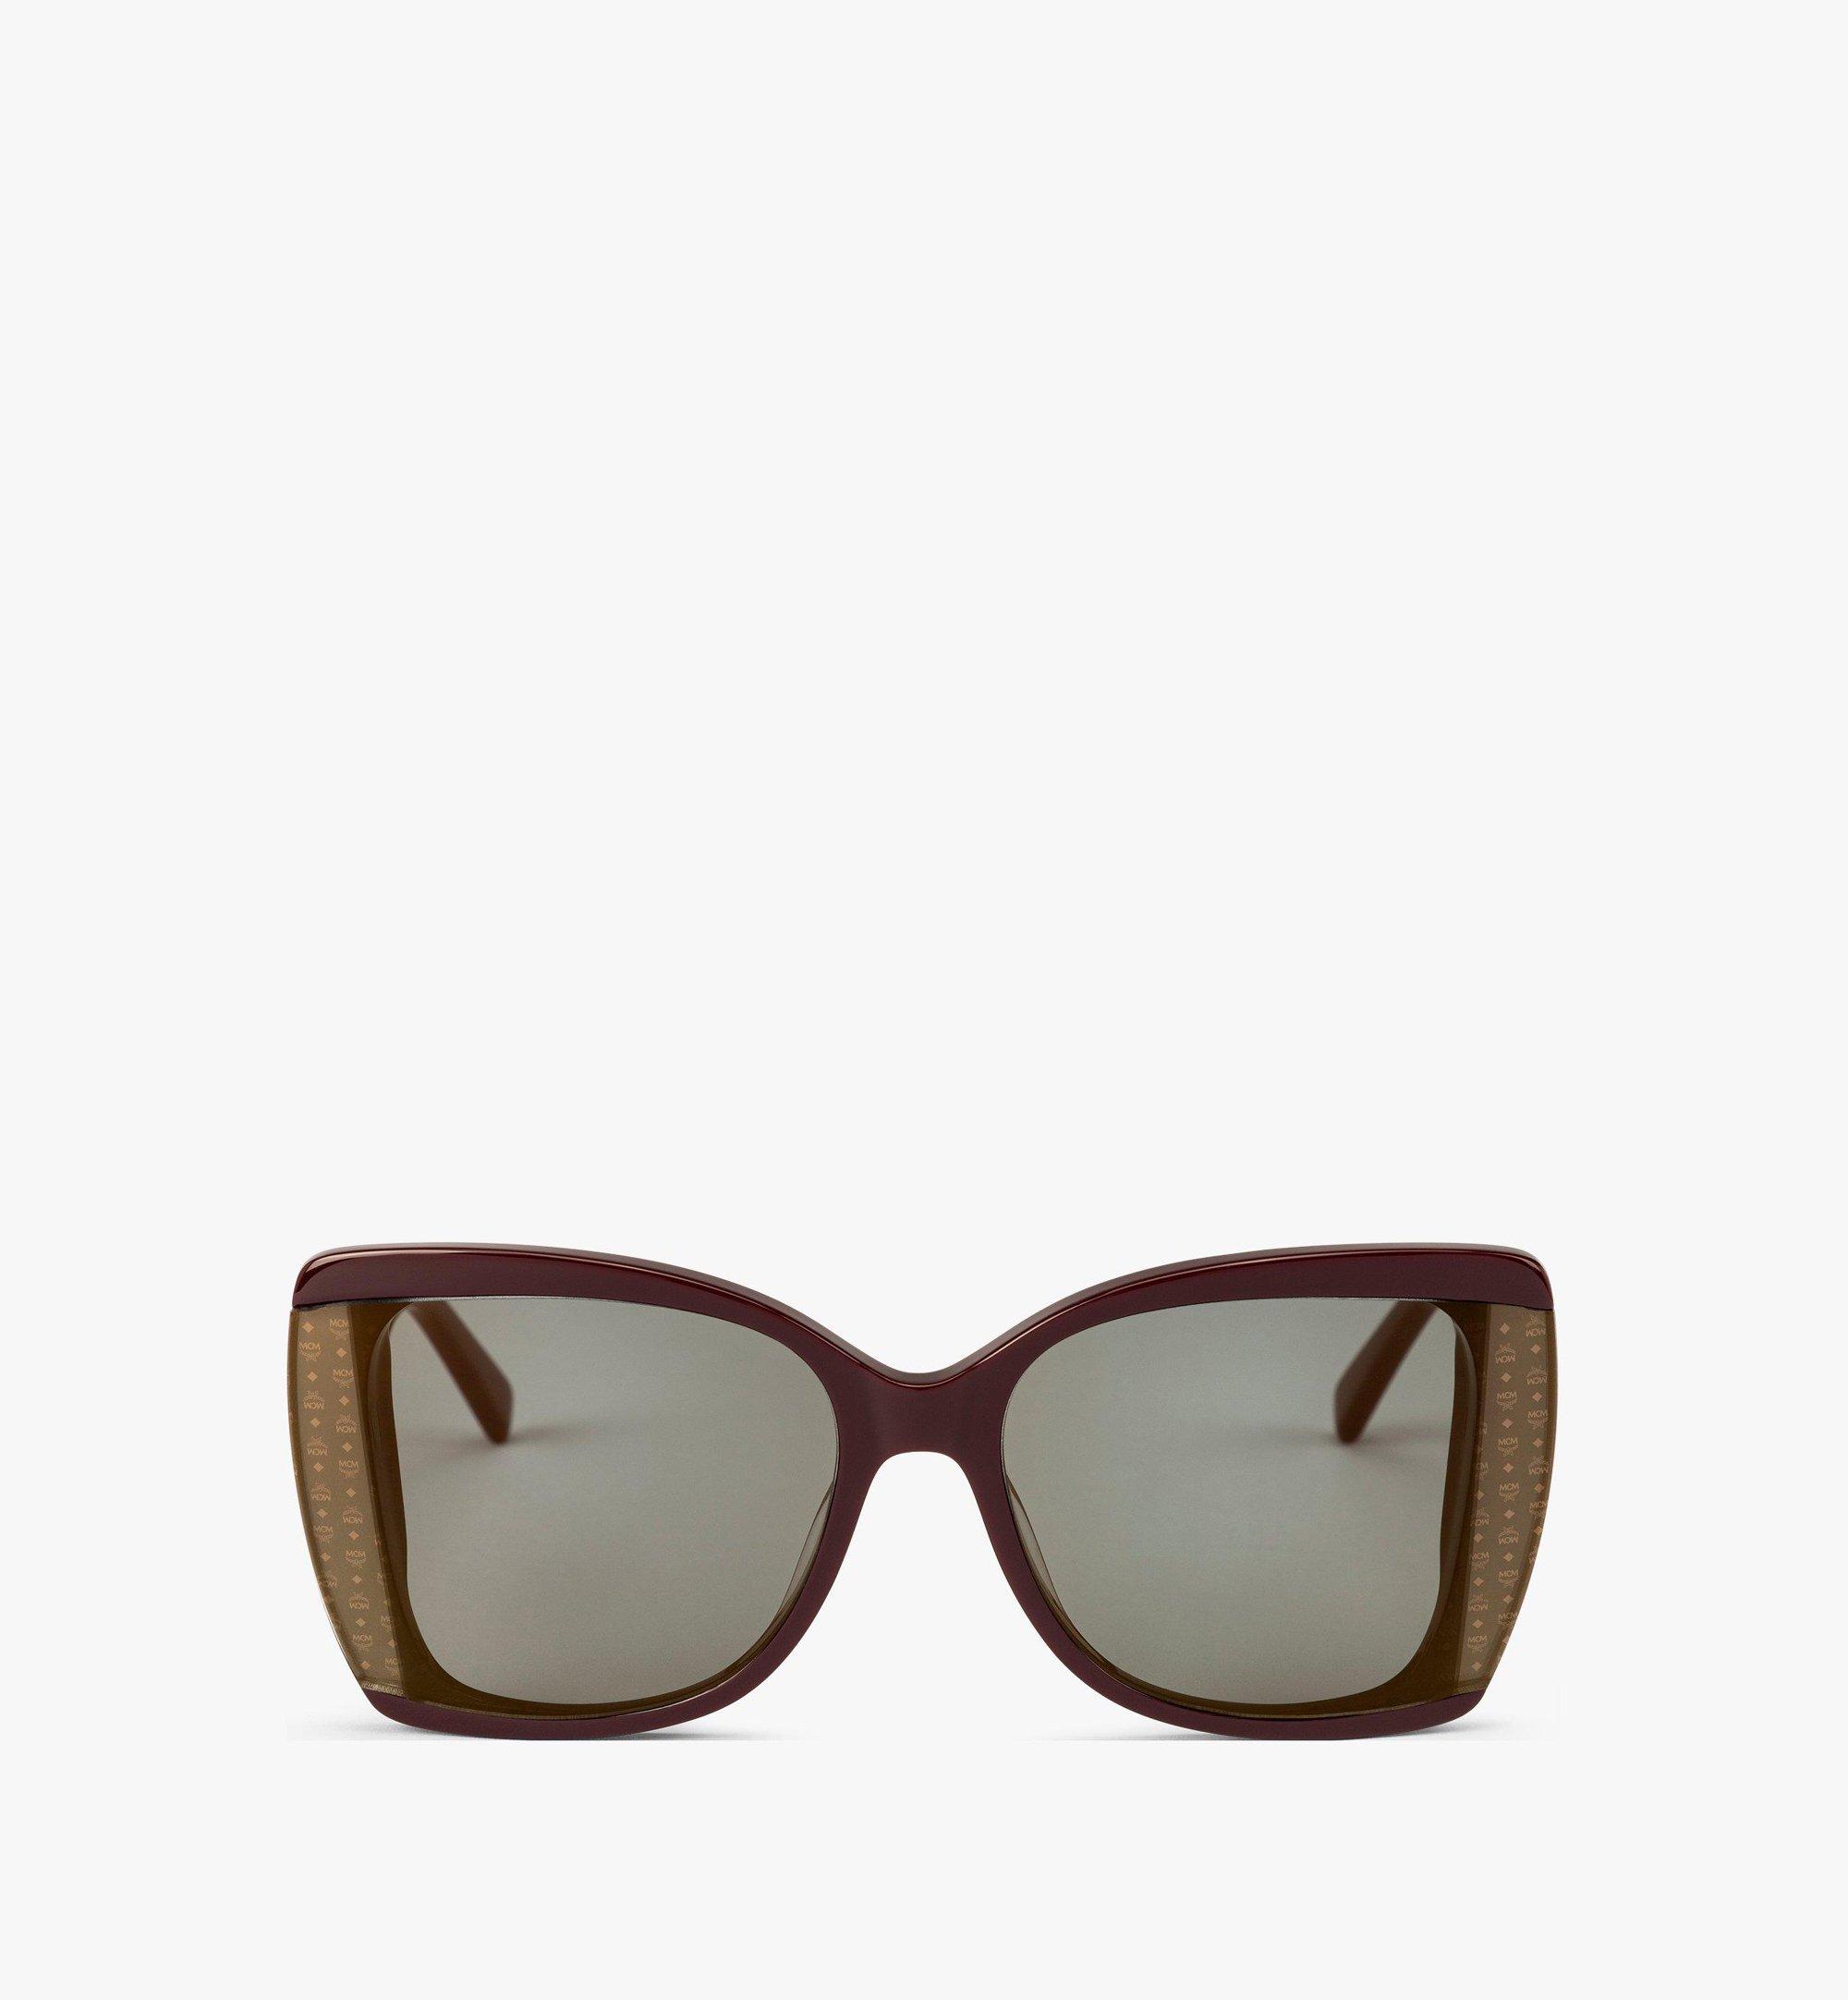 MCM Butterfly Sunglasses